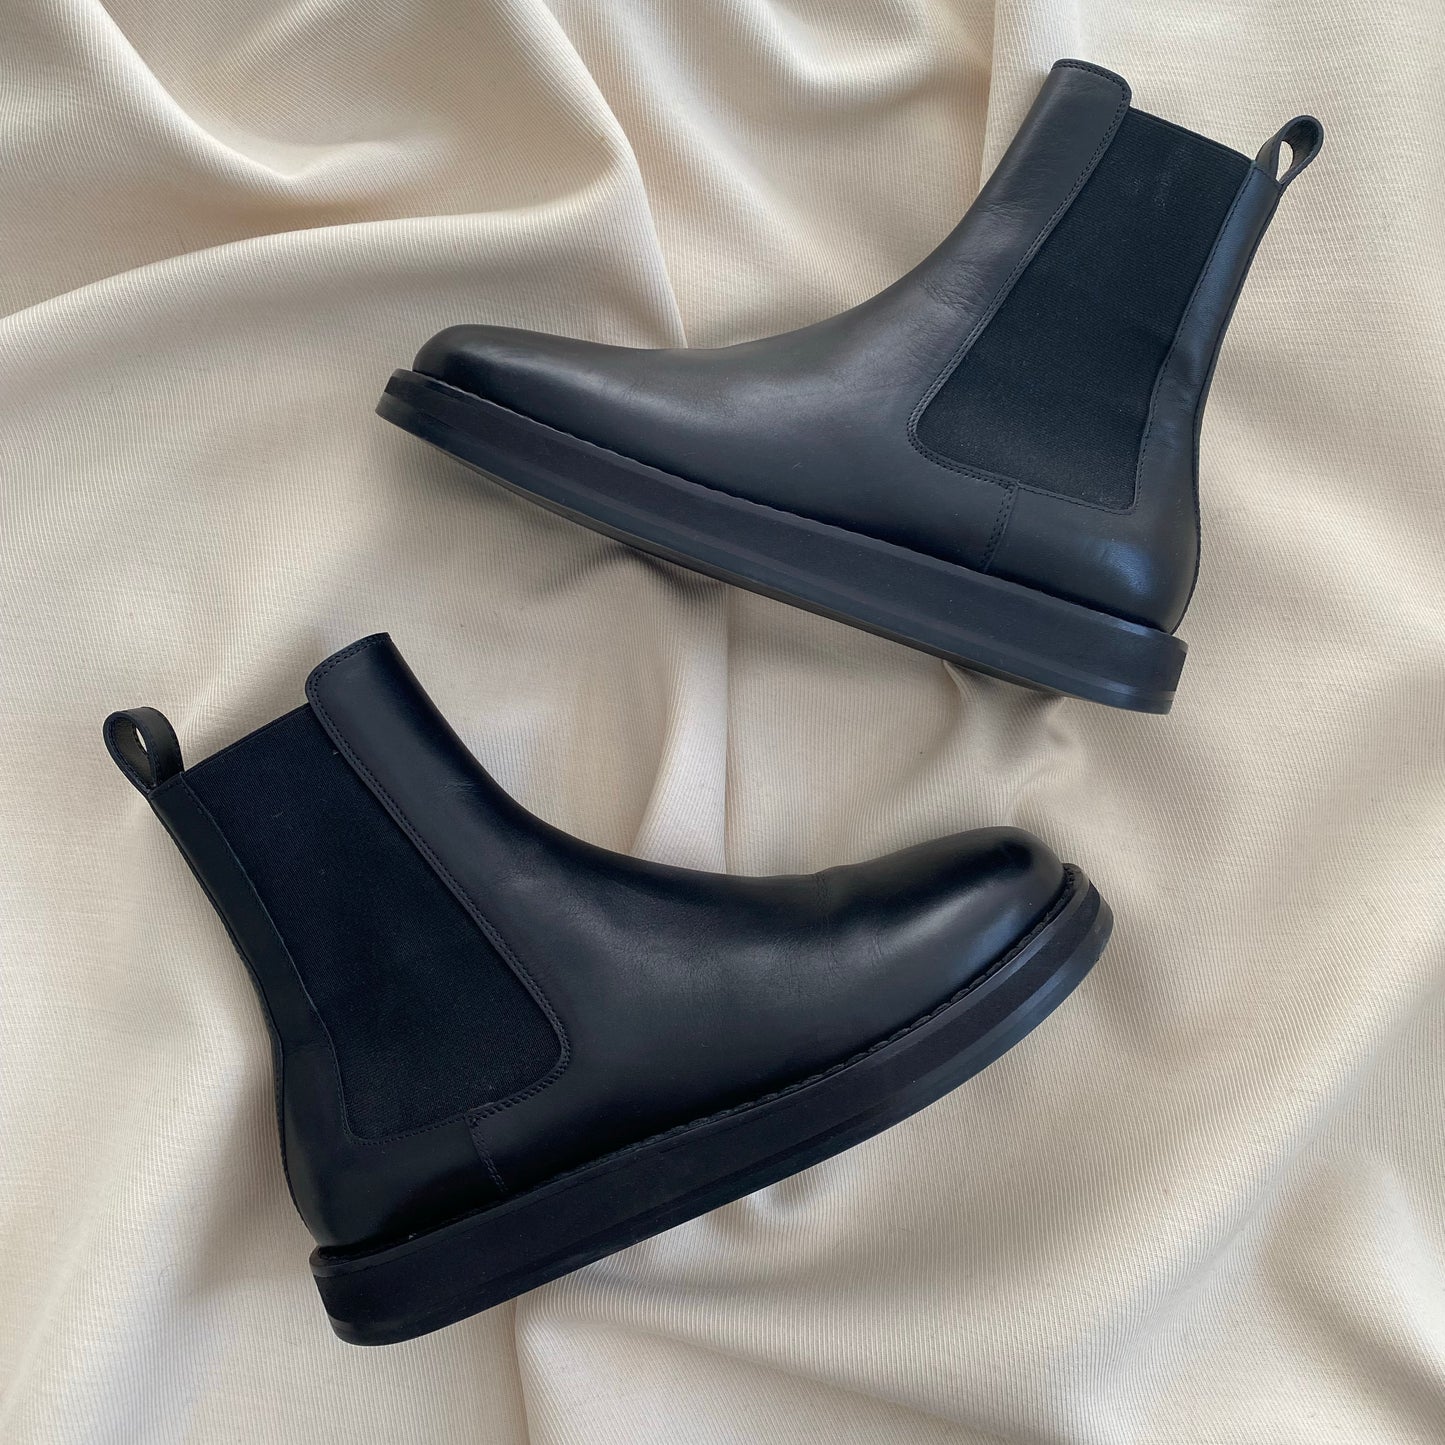 The Row Gaia Boot in Black, size 39